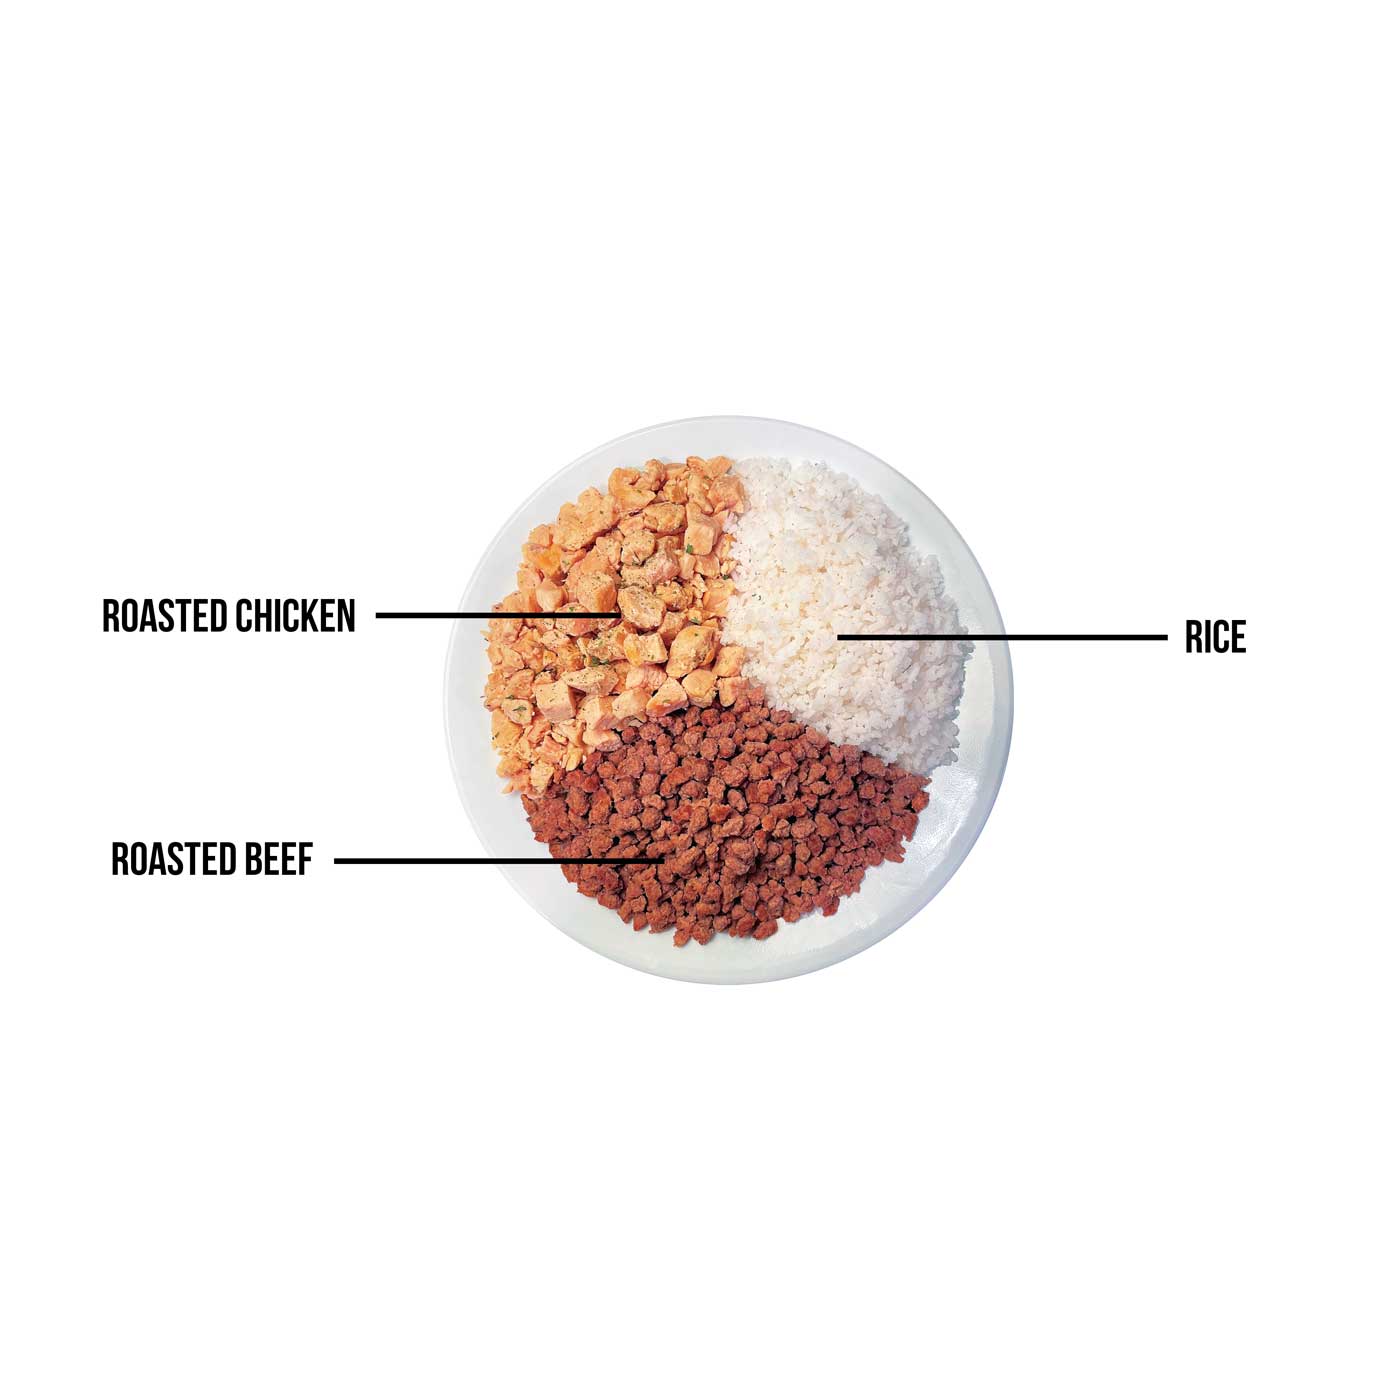 80 Serving Freeze Dried Meat Bucket and Rice